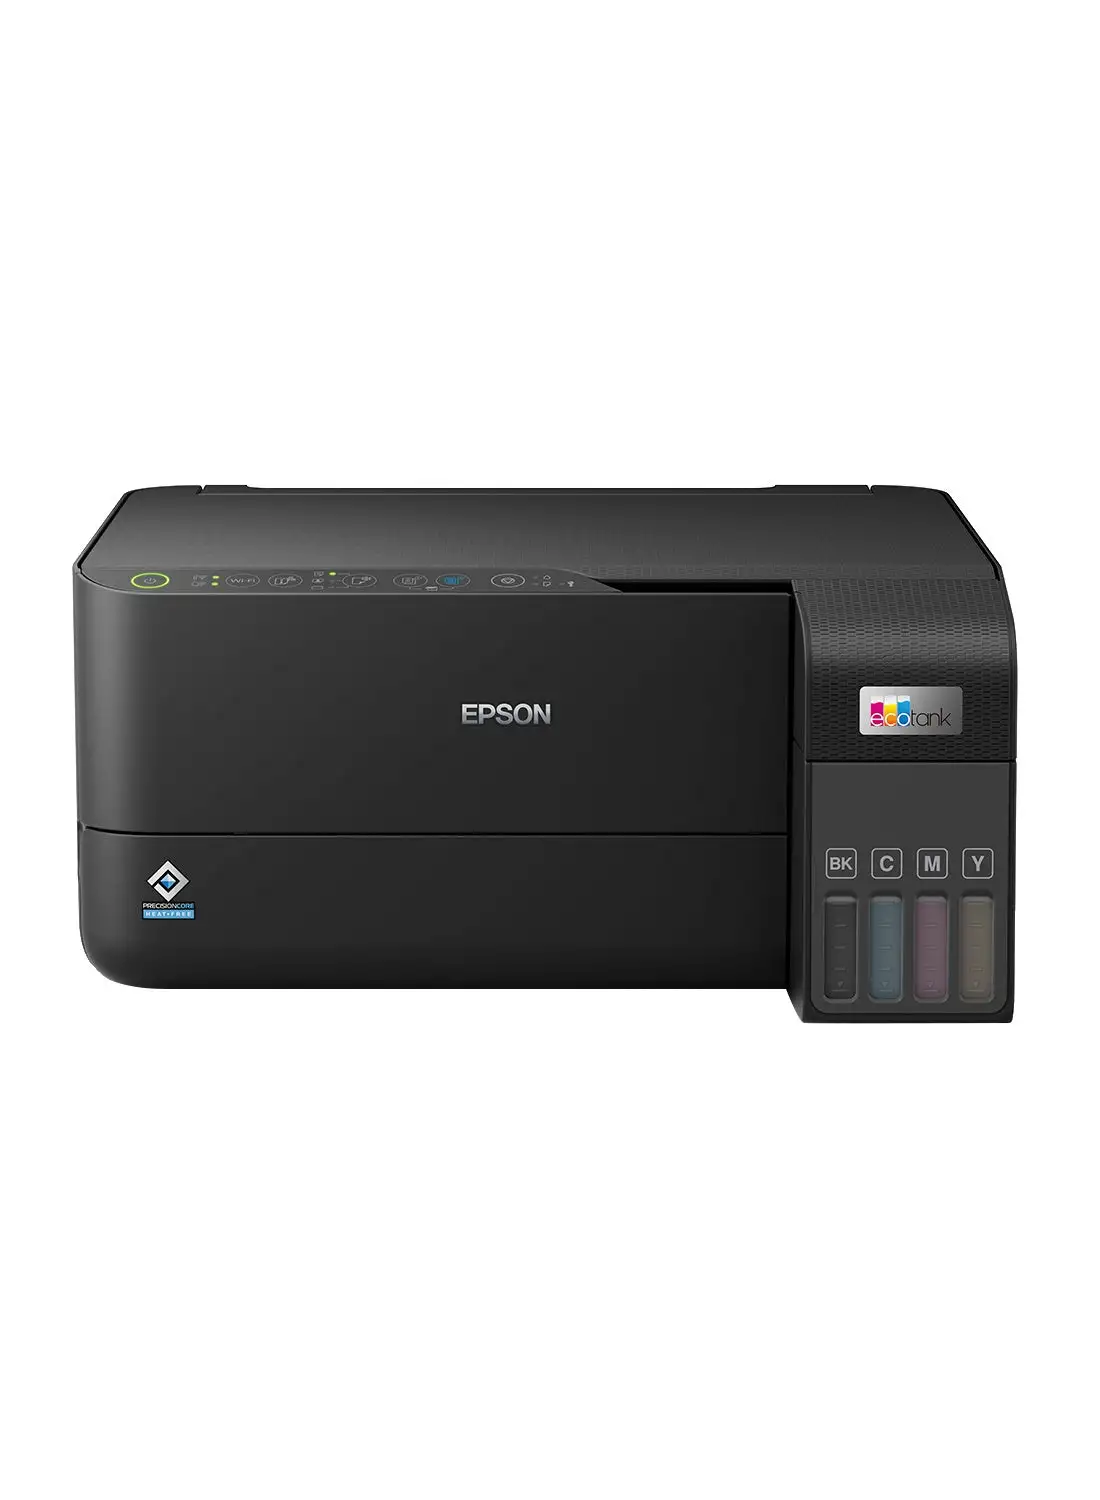 EPSON EcoTank L3550 Home Ink Tank Printer, High-speed A4 Colour 3-in-1 Printer With Wi-Fi Direct, Photo Printer And Smart App connectivity Black